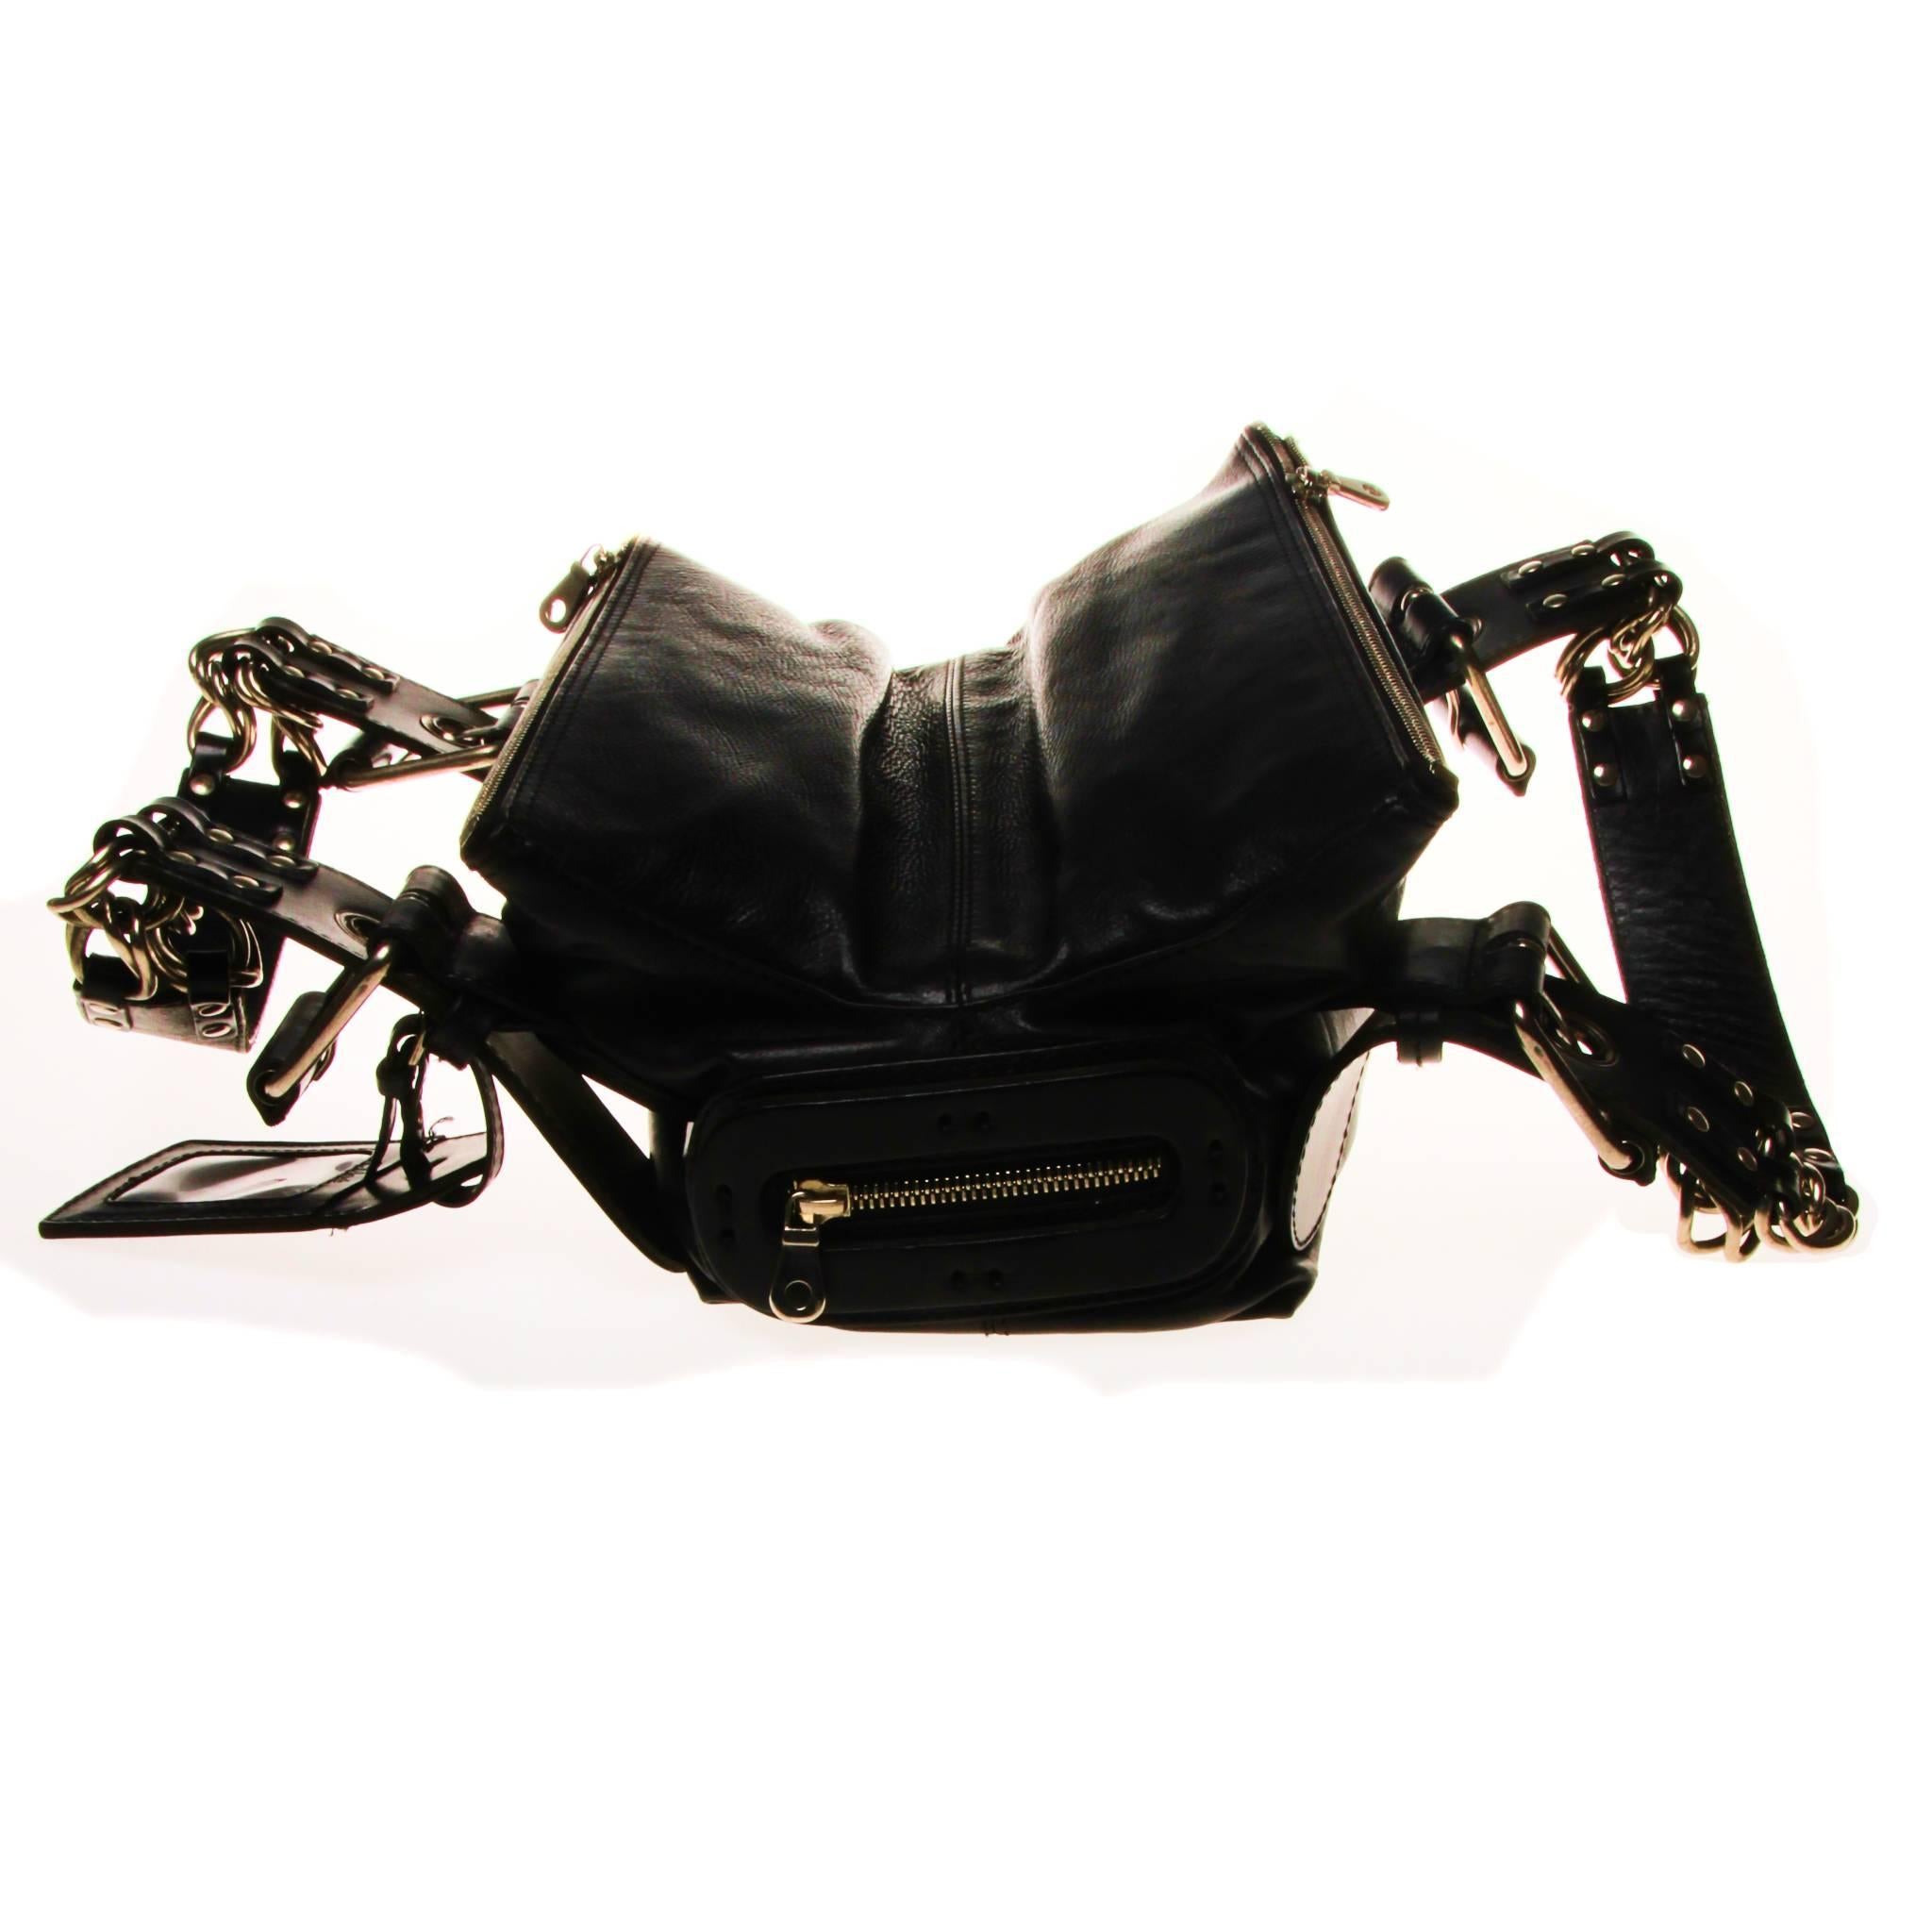 This Chloe handbag is composed of black grain leather and features double top handles with buckle and chain features. There are two exterior top zipper compartments and one interior zipper compartment. Branded zipper compartment on the back